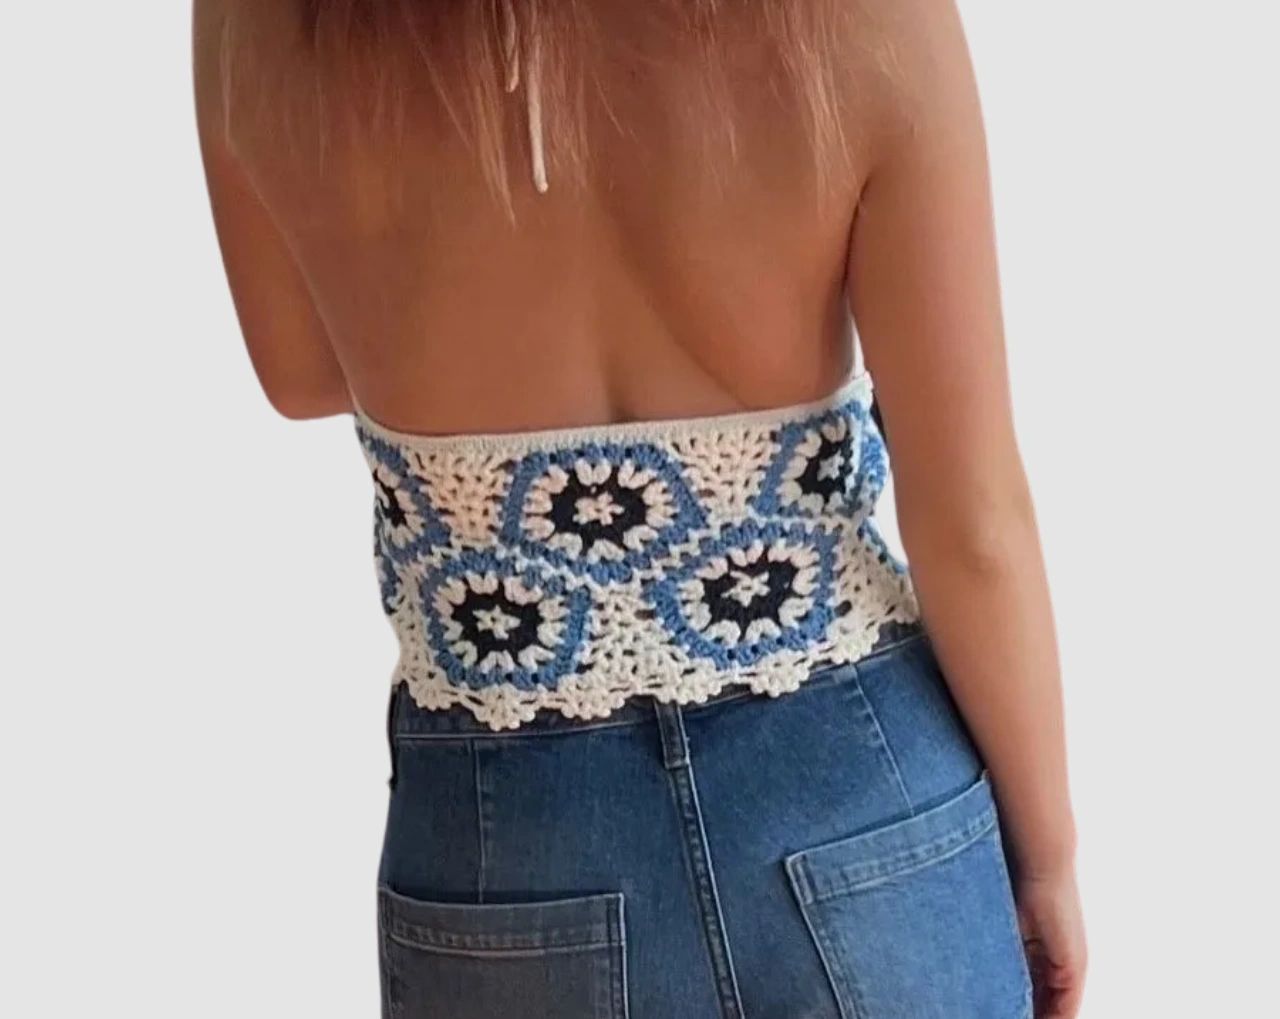 The Roseanne Beachy Crochet Halter Top with Tie at Neck